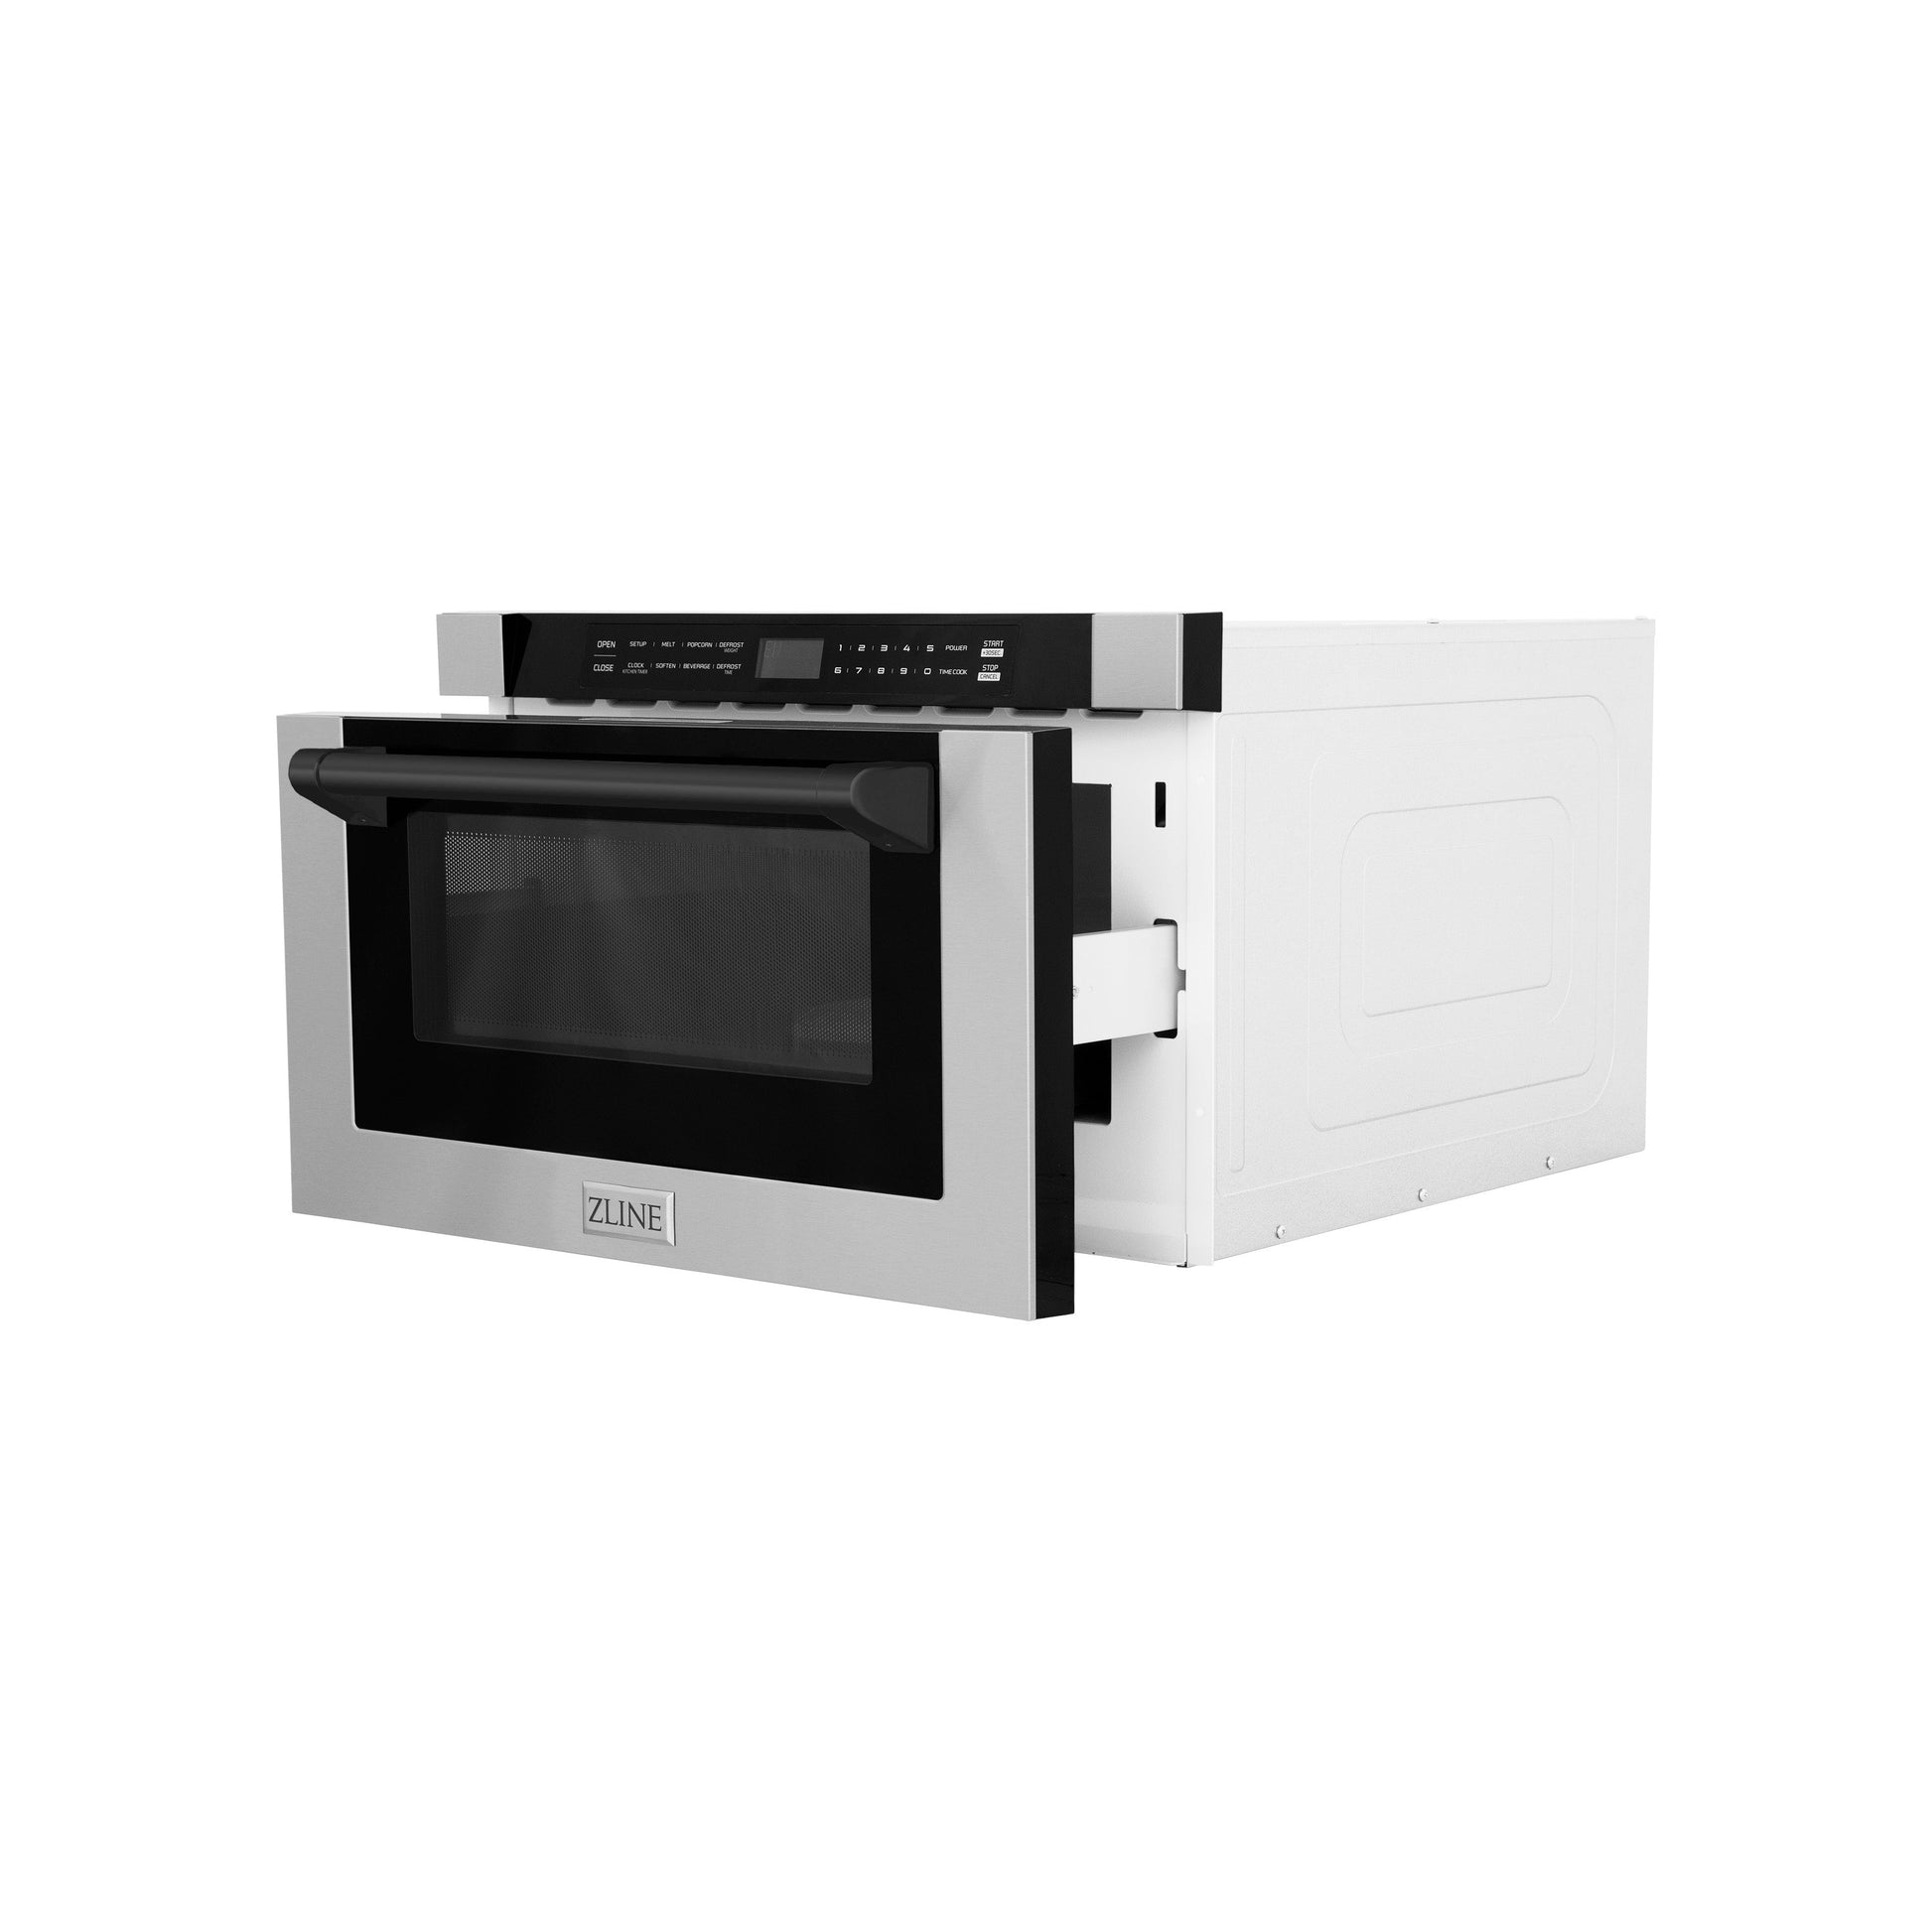 ZLINE Autograph Edition 24" Built-in Microwave Drawer - Traditional Handle in Stainless Steel with Accents